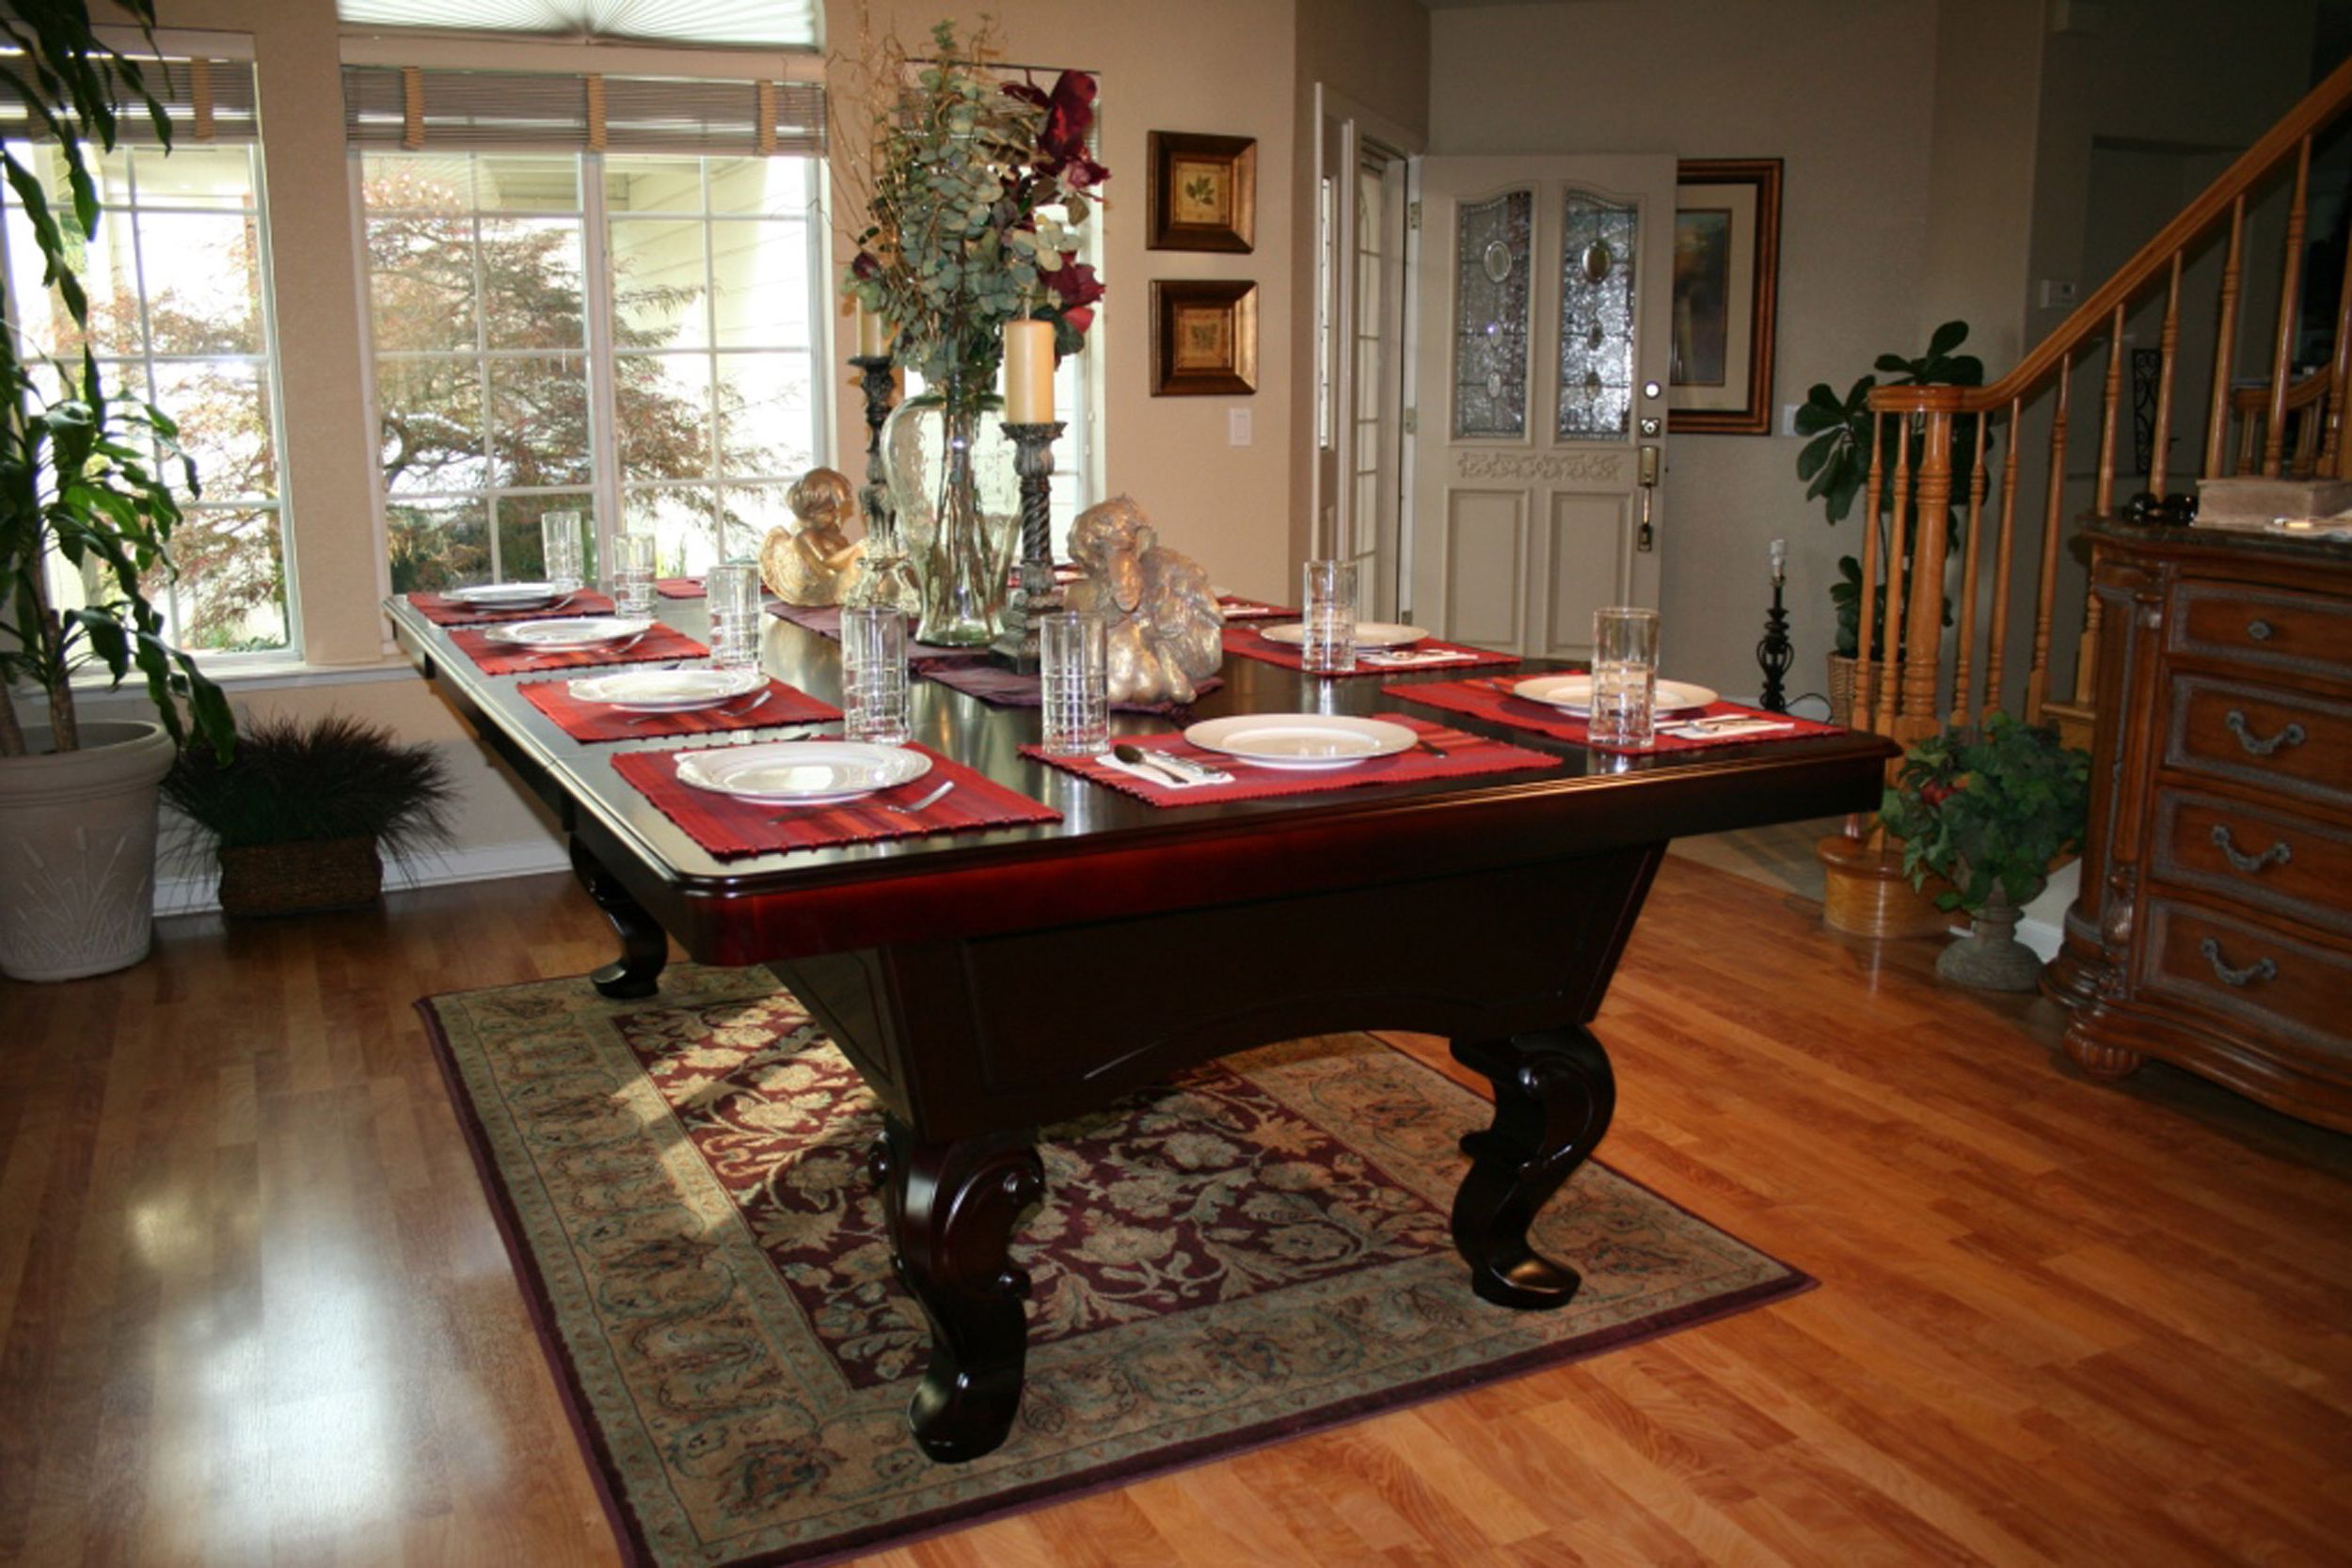 Modern Dining Top Pool Table Modern Dining Top Imaginethatpooltables Pool Tables Modern Dining Room Table (View 8 of 28)